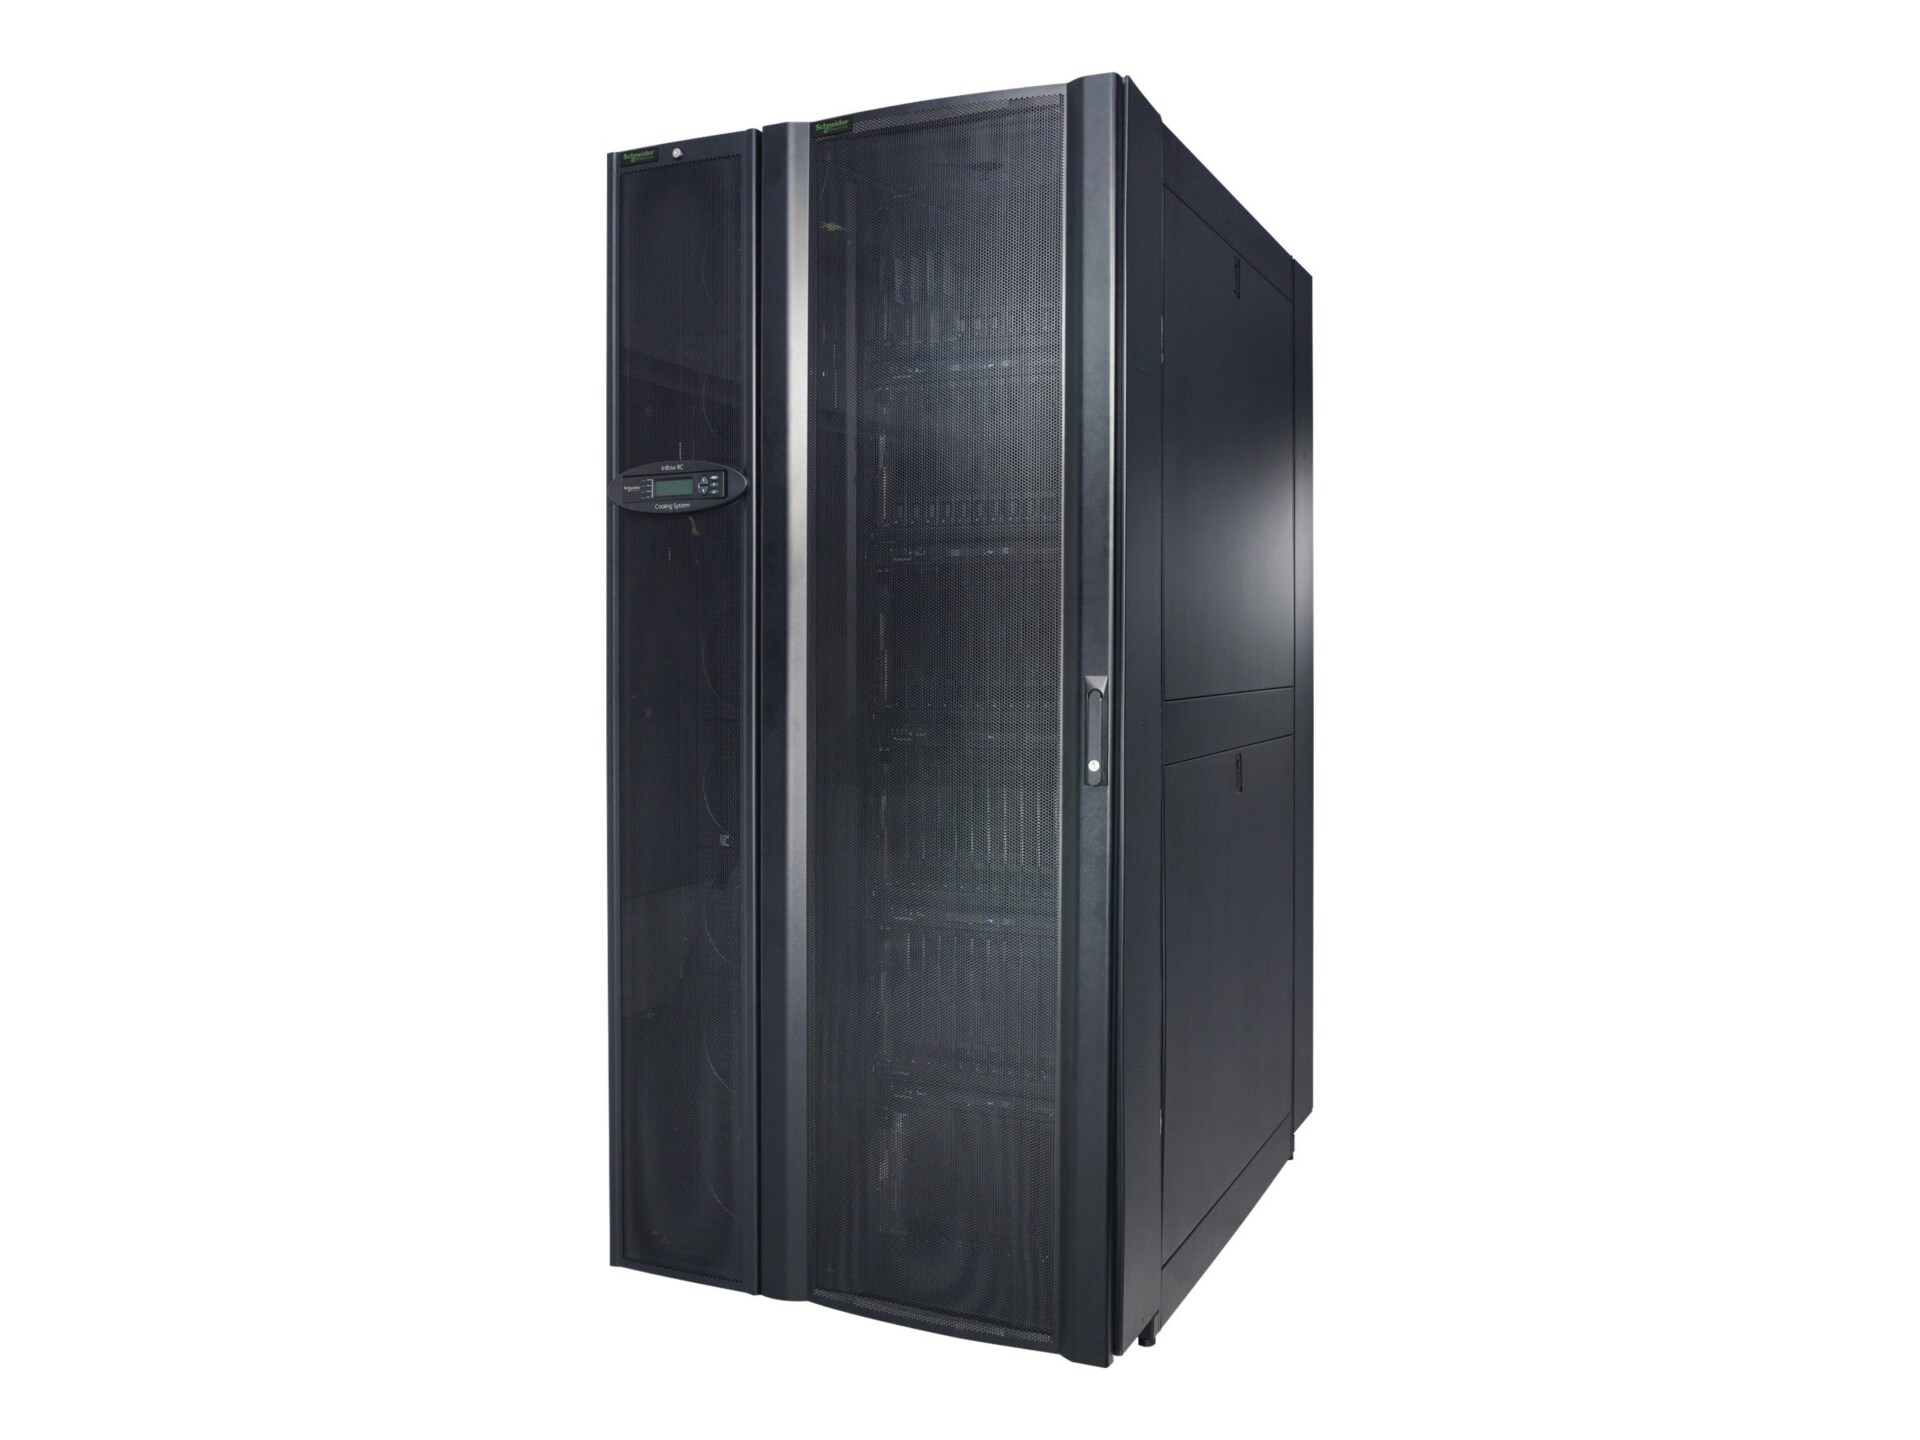 APC InRow SC System 2 InRow SC units, 1 NetShelter SX Rack 600mm, and Rear Containment - air-conditioning cooling system